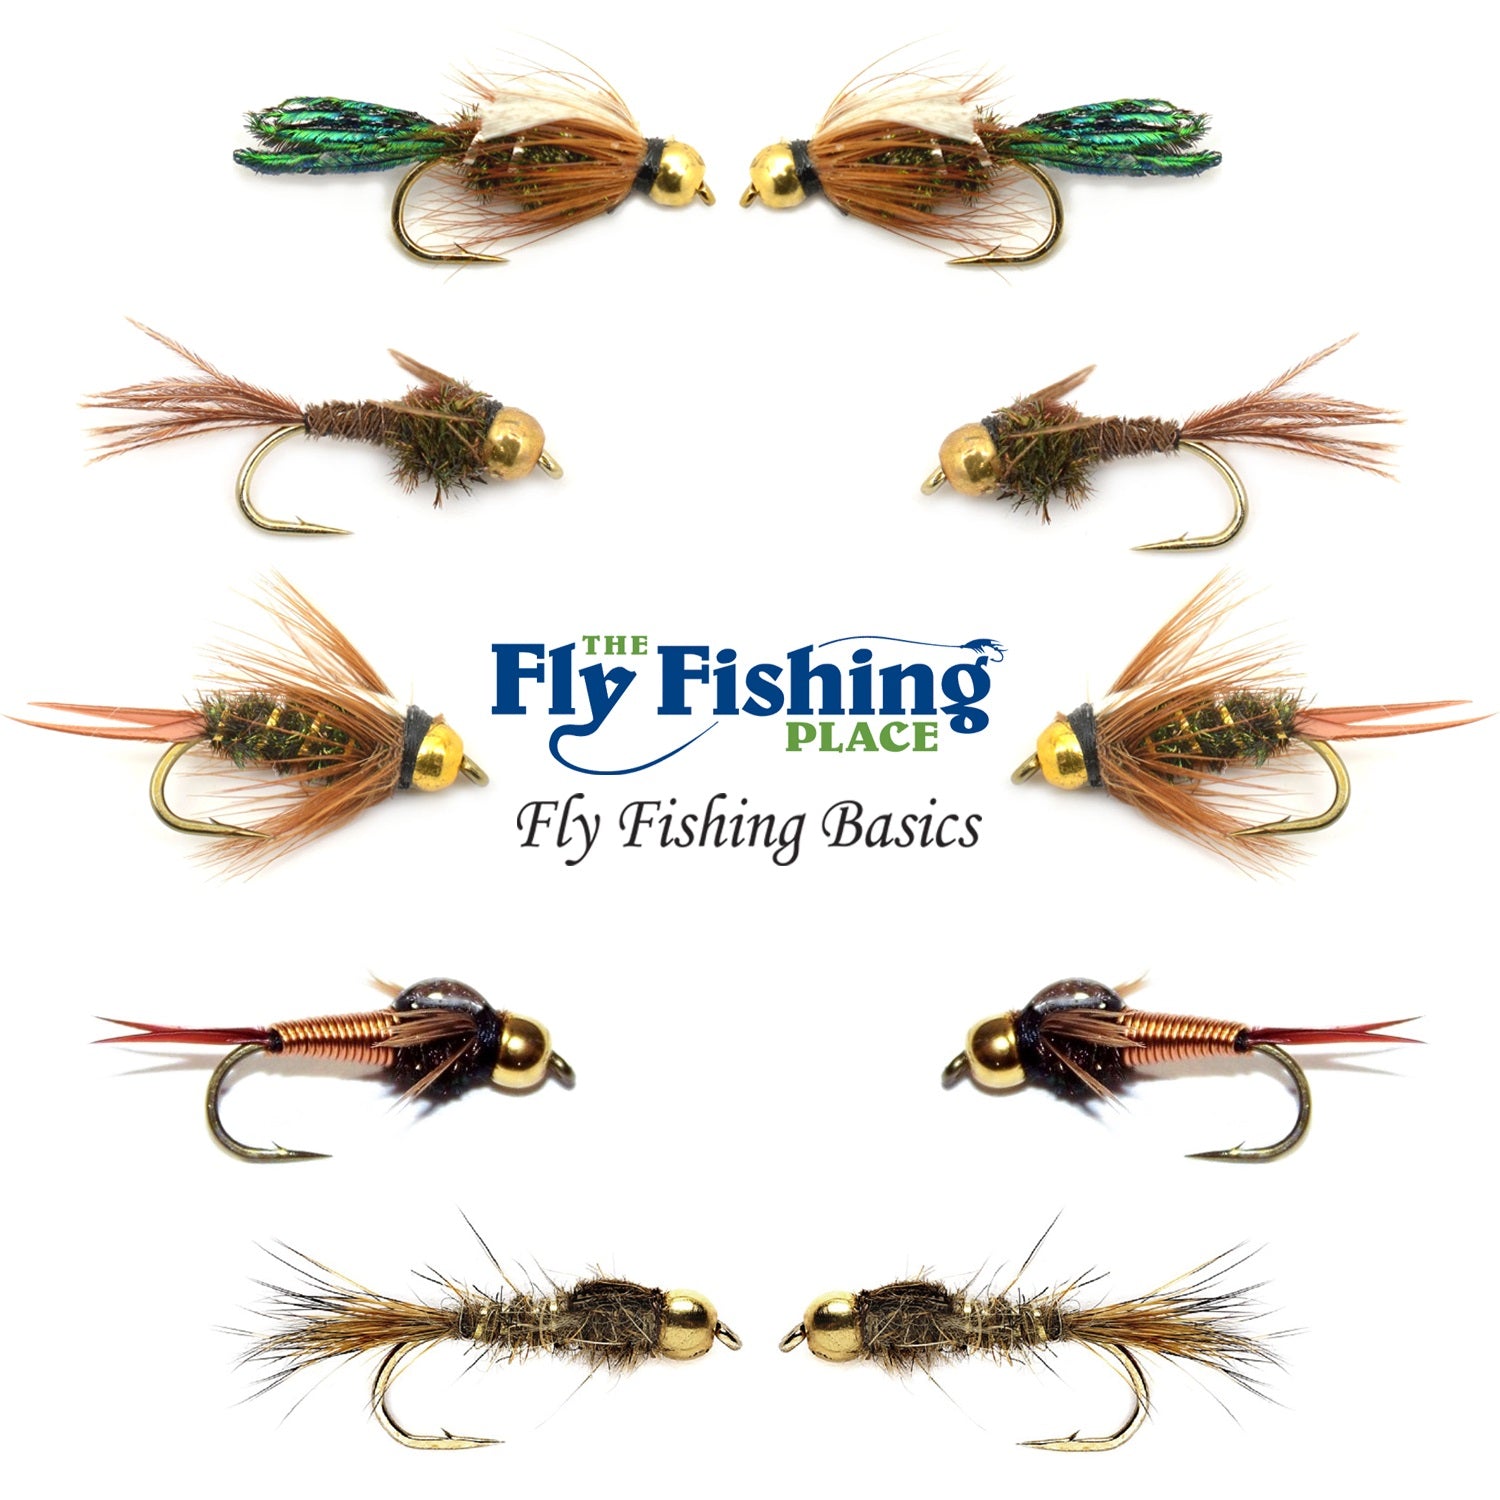 The Fly Fishing Place Trout Fly Assortment - San Juan Worm Power Bead 1 Dozen Wet Nymph Fly Fishing Flies - Hook Size 10-3 Each of 4 Patterns